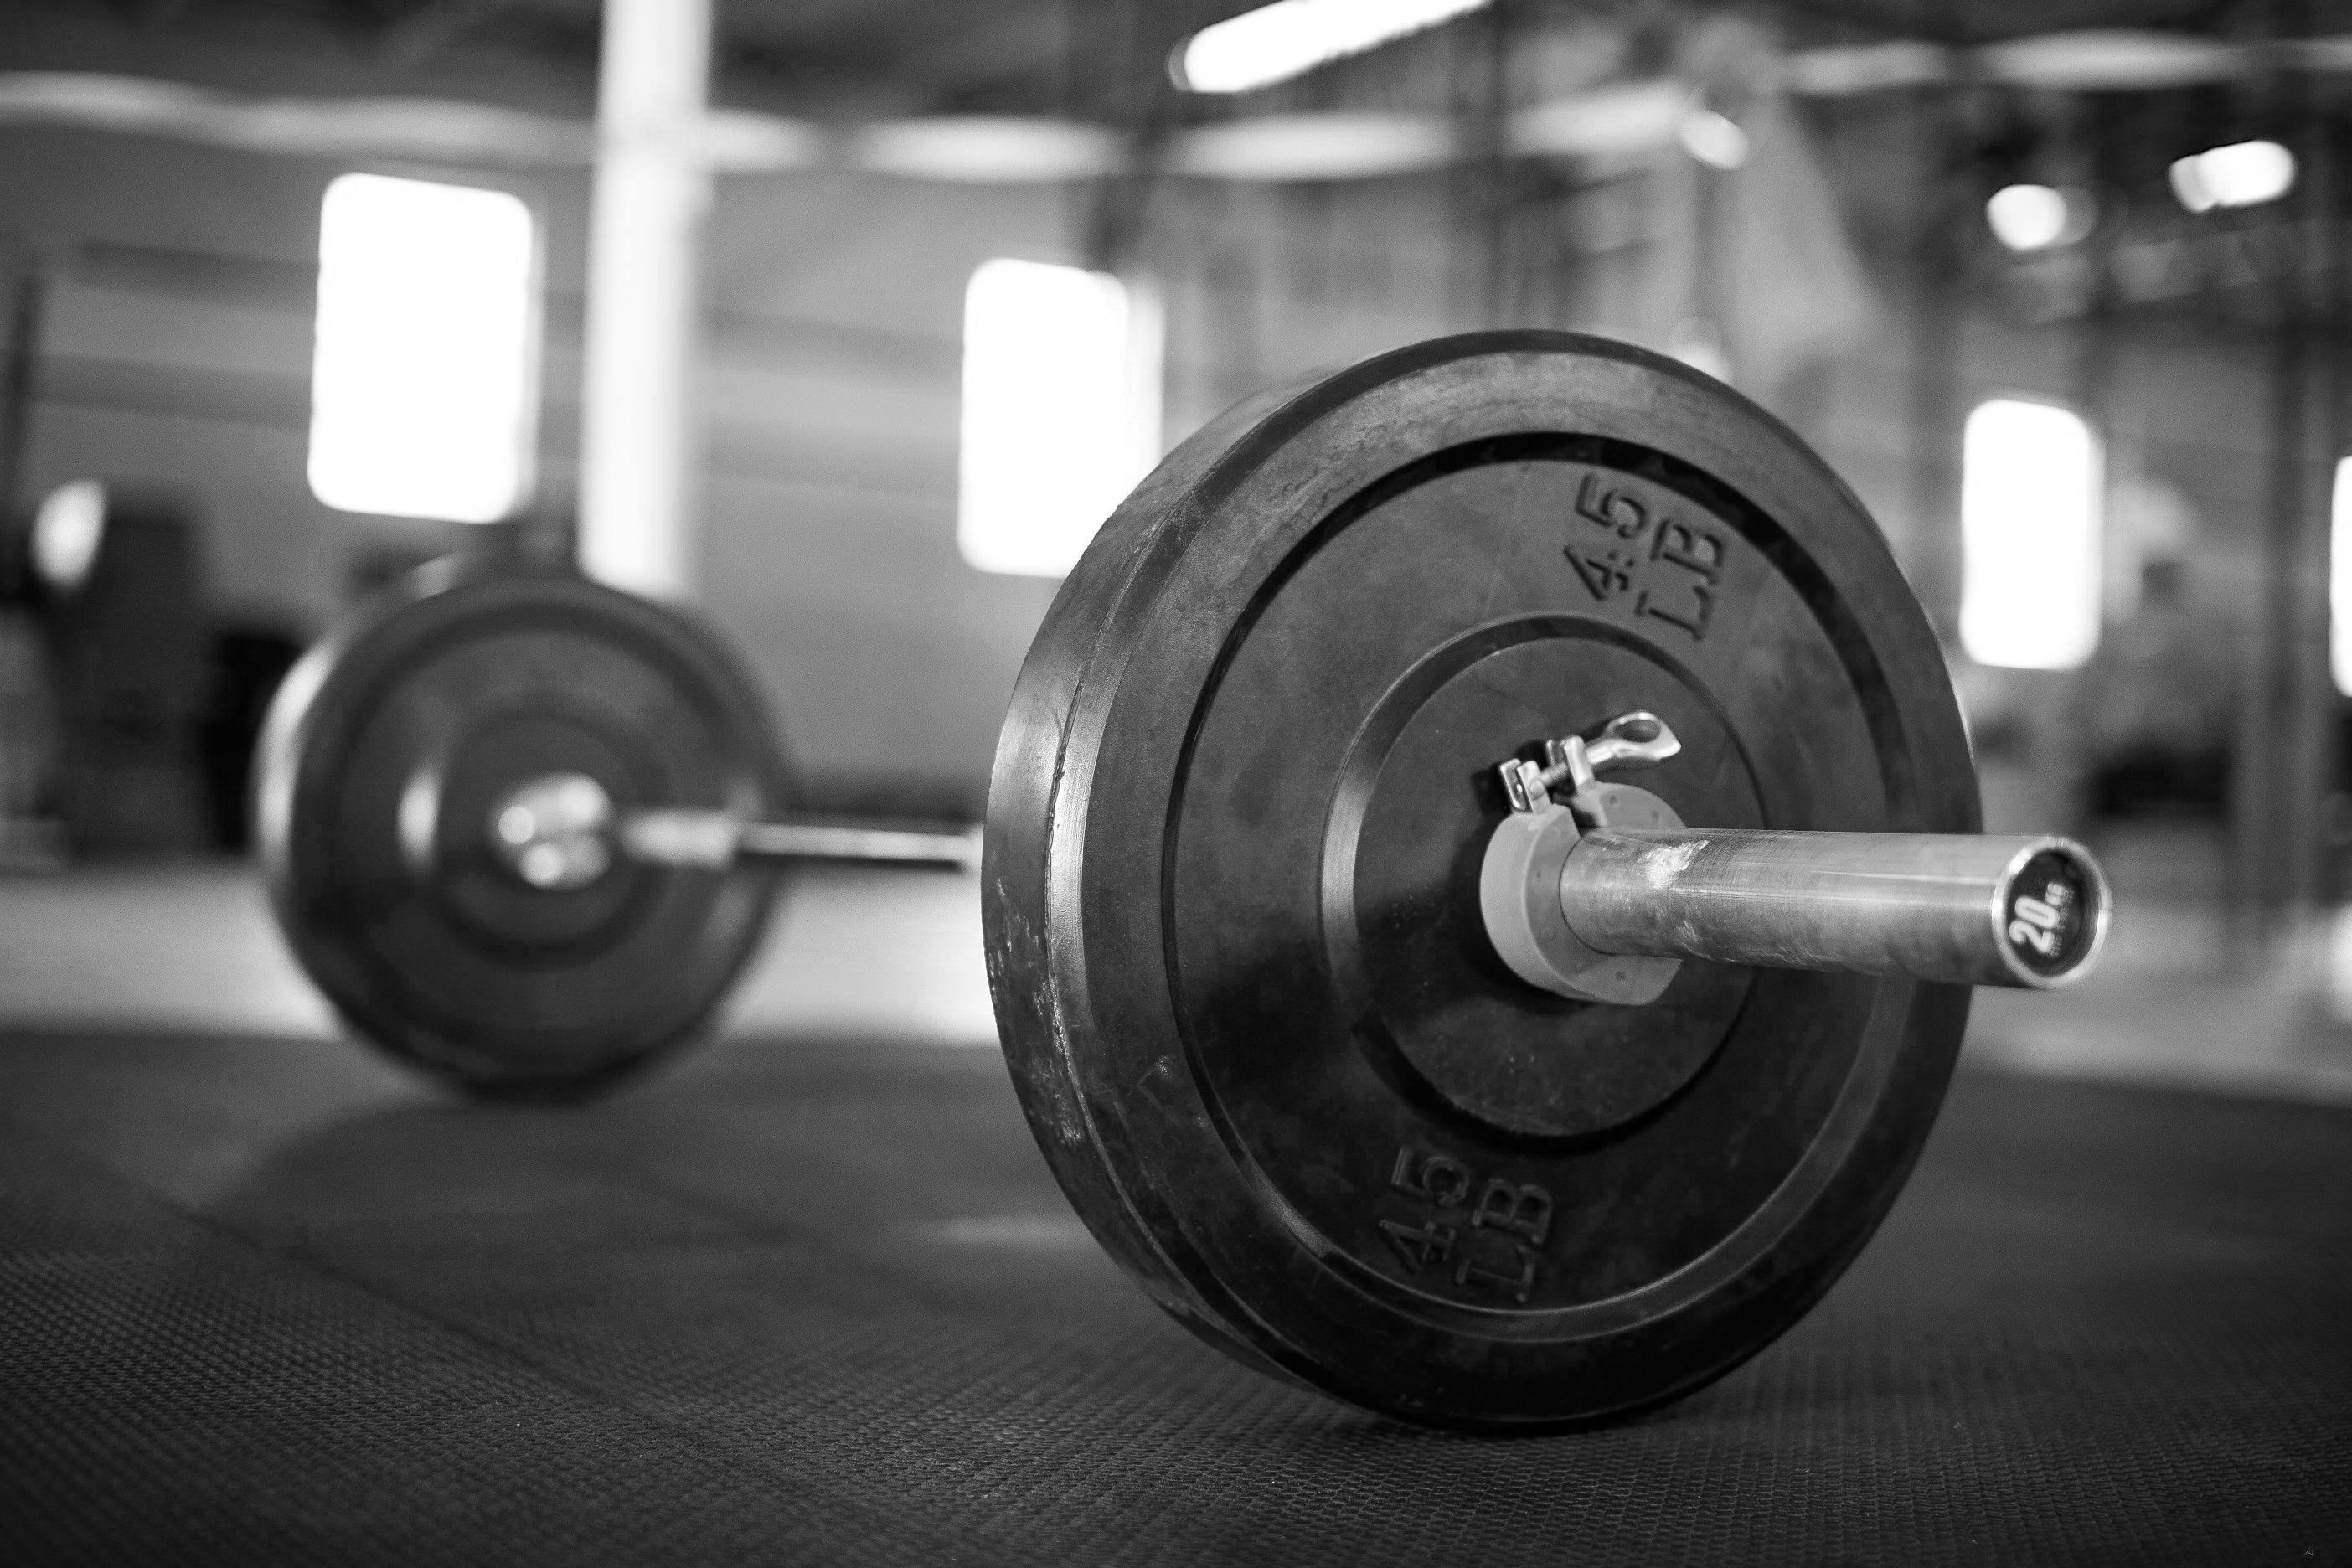 CrossFit: Barbell, 45 lb, Weight plate, Baked enamel finish, Made of solid cast iron, Monochrome. 2810x1880 HD Wallpaper.